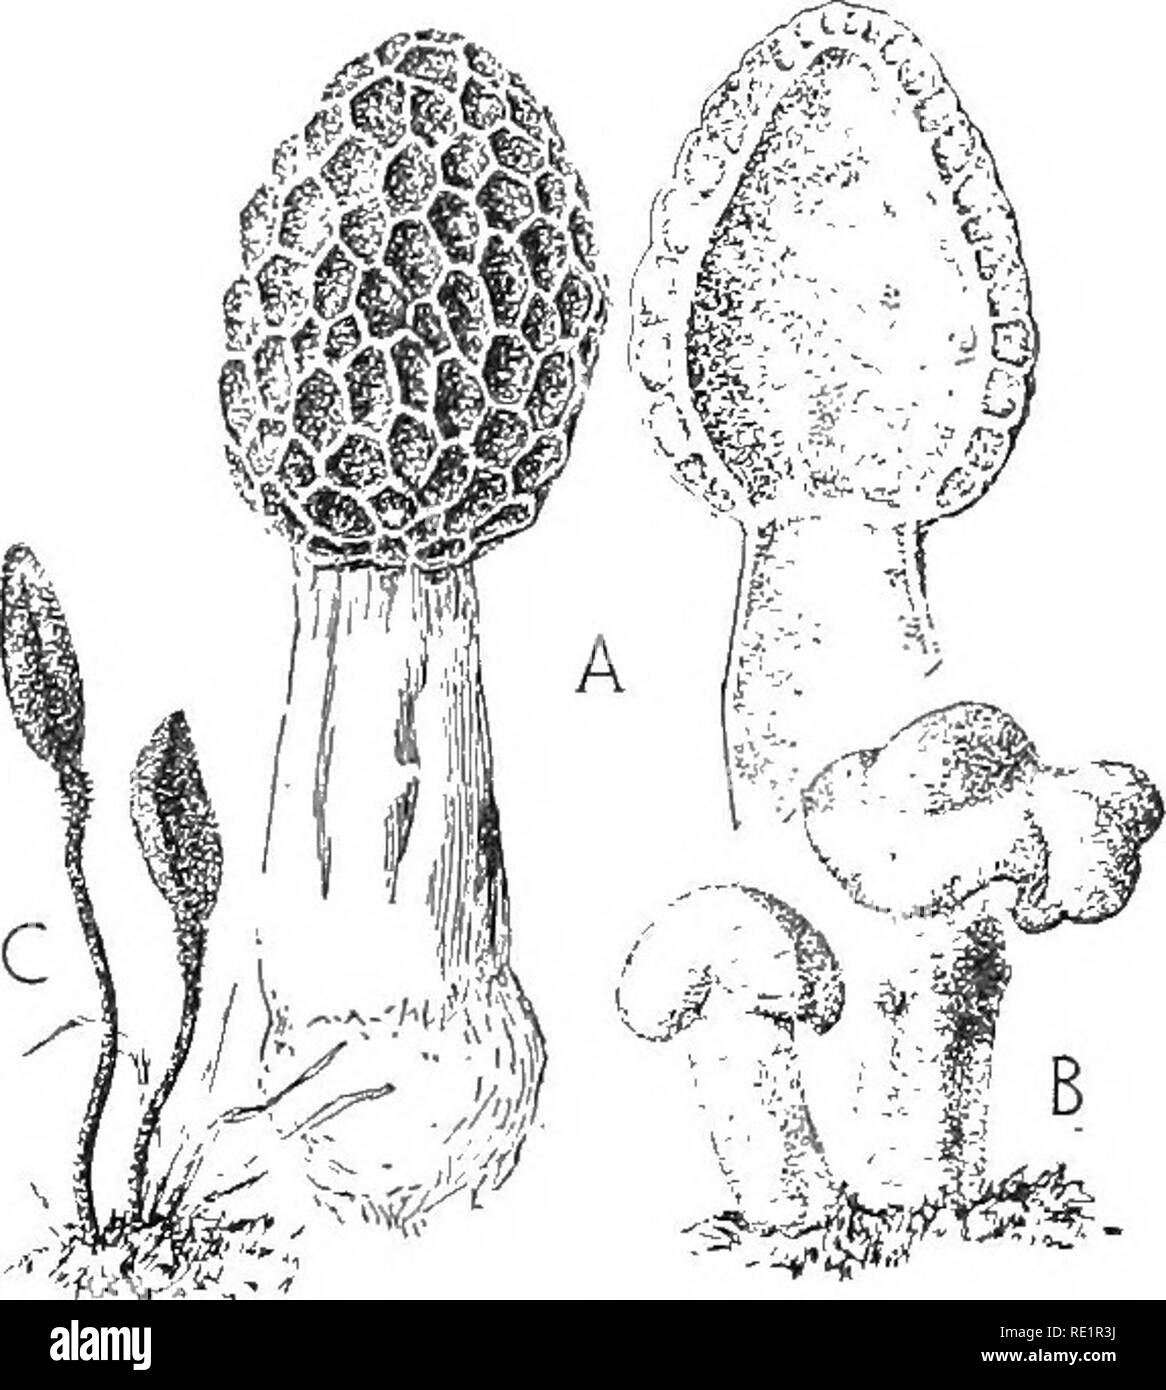 . Nature and development of plants. Botany. 232 THE ASCO-LICHENS size, forms of Morchella occasionally reaching the height of a foot and some species of Gyromitra weigh over a pound. 86. The Asco-lichens.âA second line of departure from the Pezizales includes a large group of plants known as the lichen. The great majority of these forms show strong evidence of rela-. â â¢^^ Fig. 141. Common forms of the Helvellales: A, the morel, Morchella, surface view at left and in section at right. The asci and paraphyses form a hymenium over the honeycomb surface. B, Leotia, a small gelatinous form of a l Stock Photo